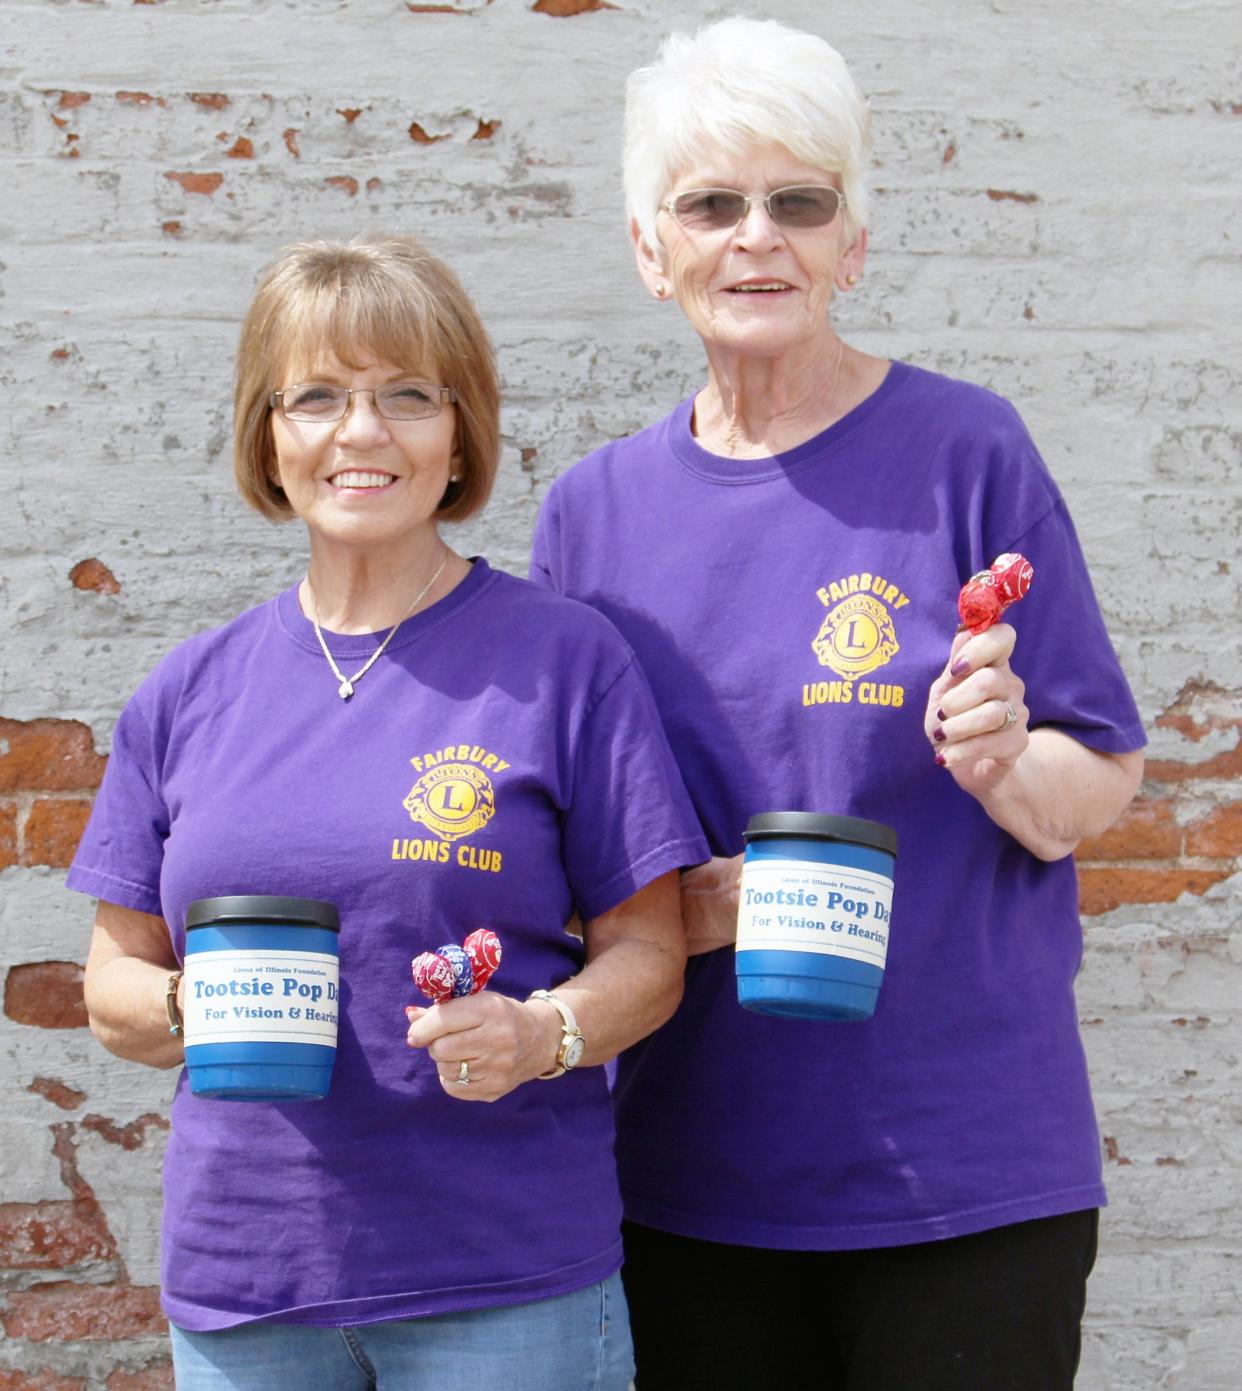 Deborah Vance, left, and Mary Catherine Carter, are promoting the Lions Tootsie Pop Days set for Friday, May 6, and Saturday, May 7. On those days, thousands of Lions and Lionesses throughout the state will give away tootsie pops and accept donations in support of those with vision and hearing problems to help them lead fuller lives. Funds raised through Tootsie Pop Days help the community through local humanitarian service projects and throughout the state in such sight-saving and sight conservation projects as Camp Lions for Blind and Deaf Children, Eye Donor Registry, glaucoma and hearing aid bank and many others. Locally, representatives will be located at Dave's Supermarket in Fairbury.